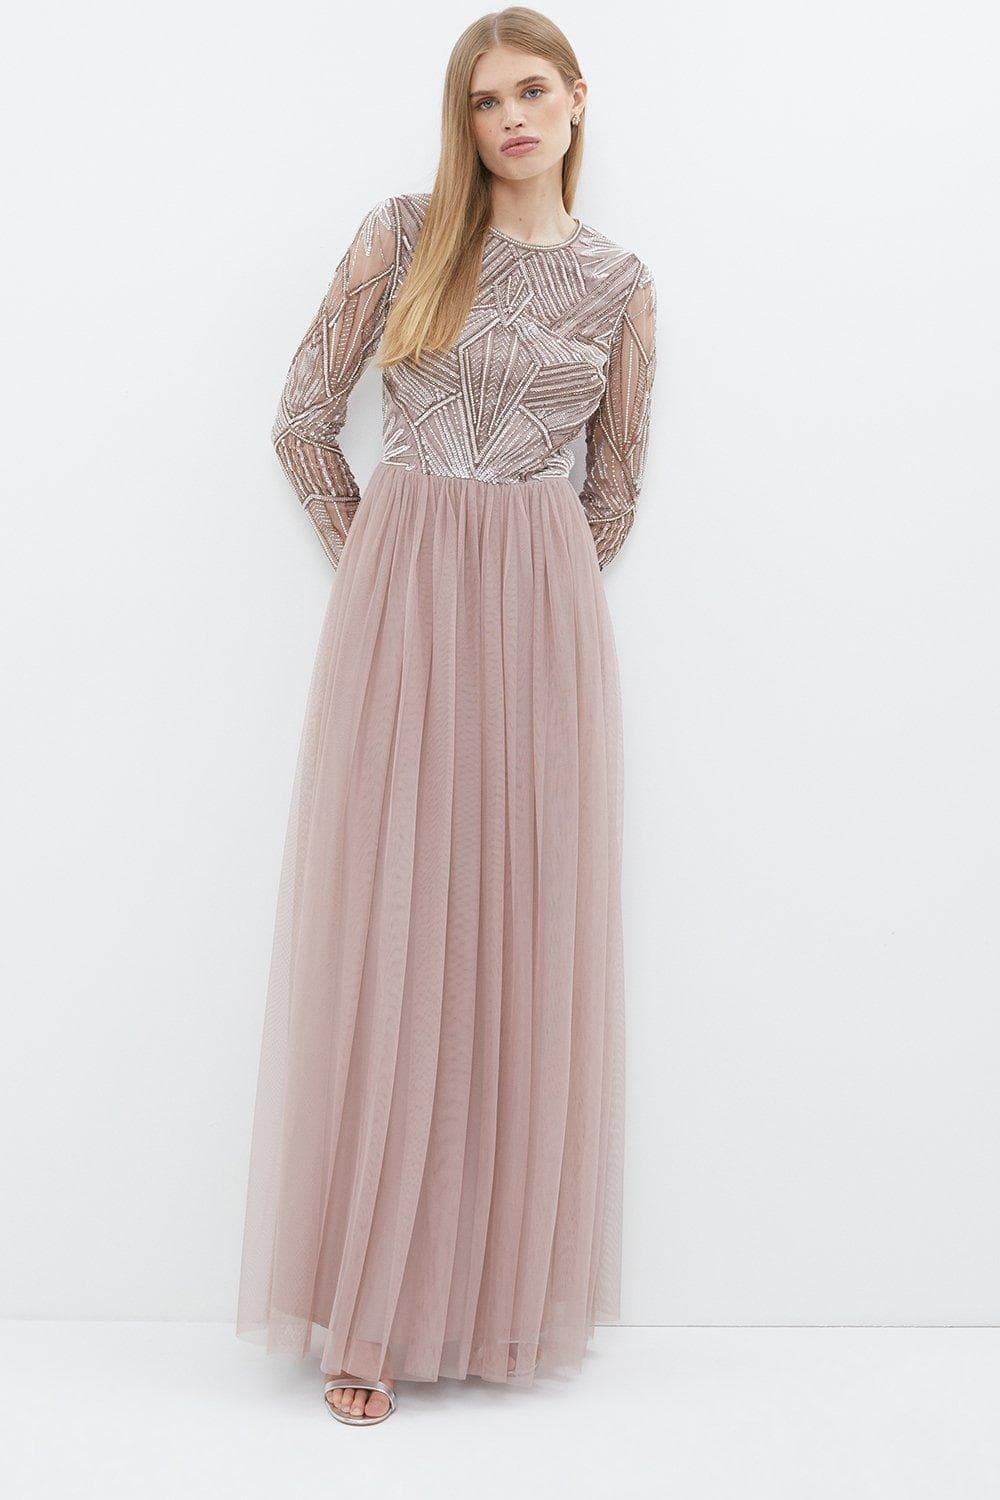 ink embellished top and chiffon skirt with long bridesmaid dress